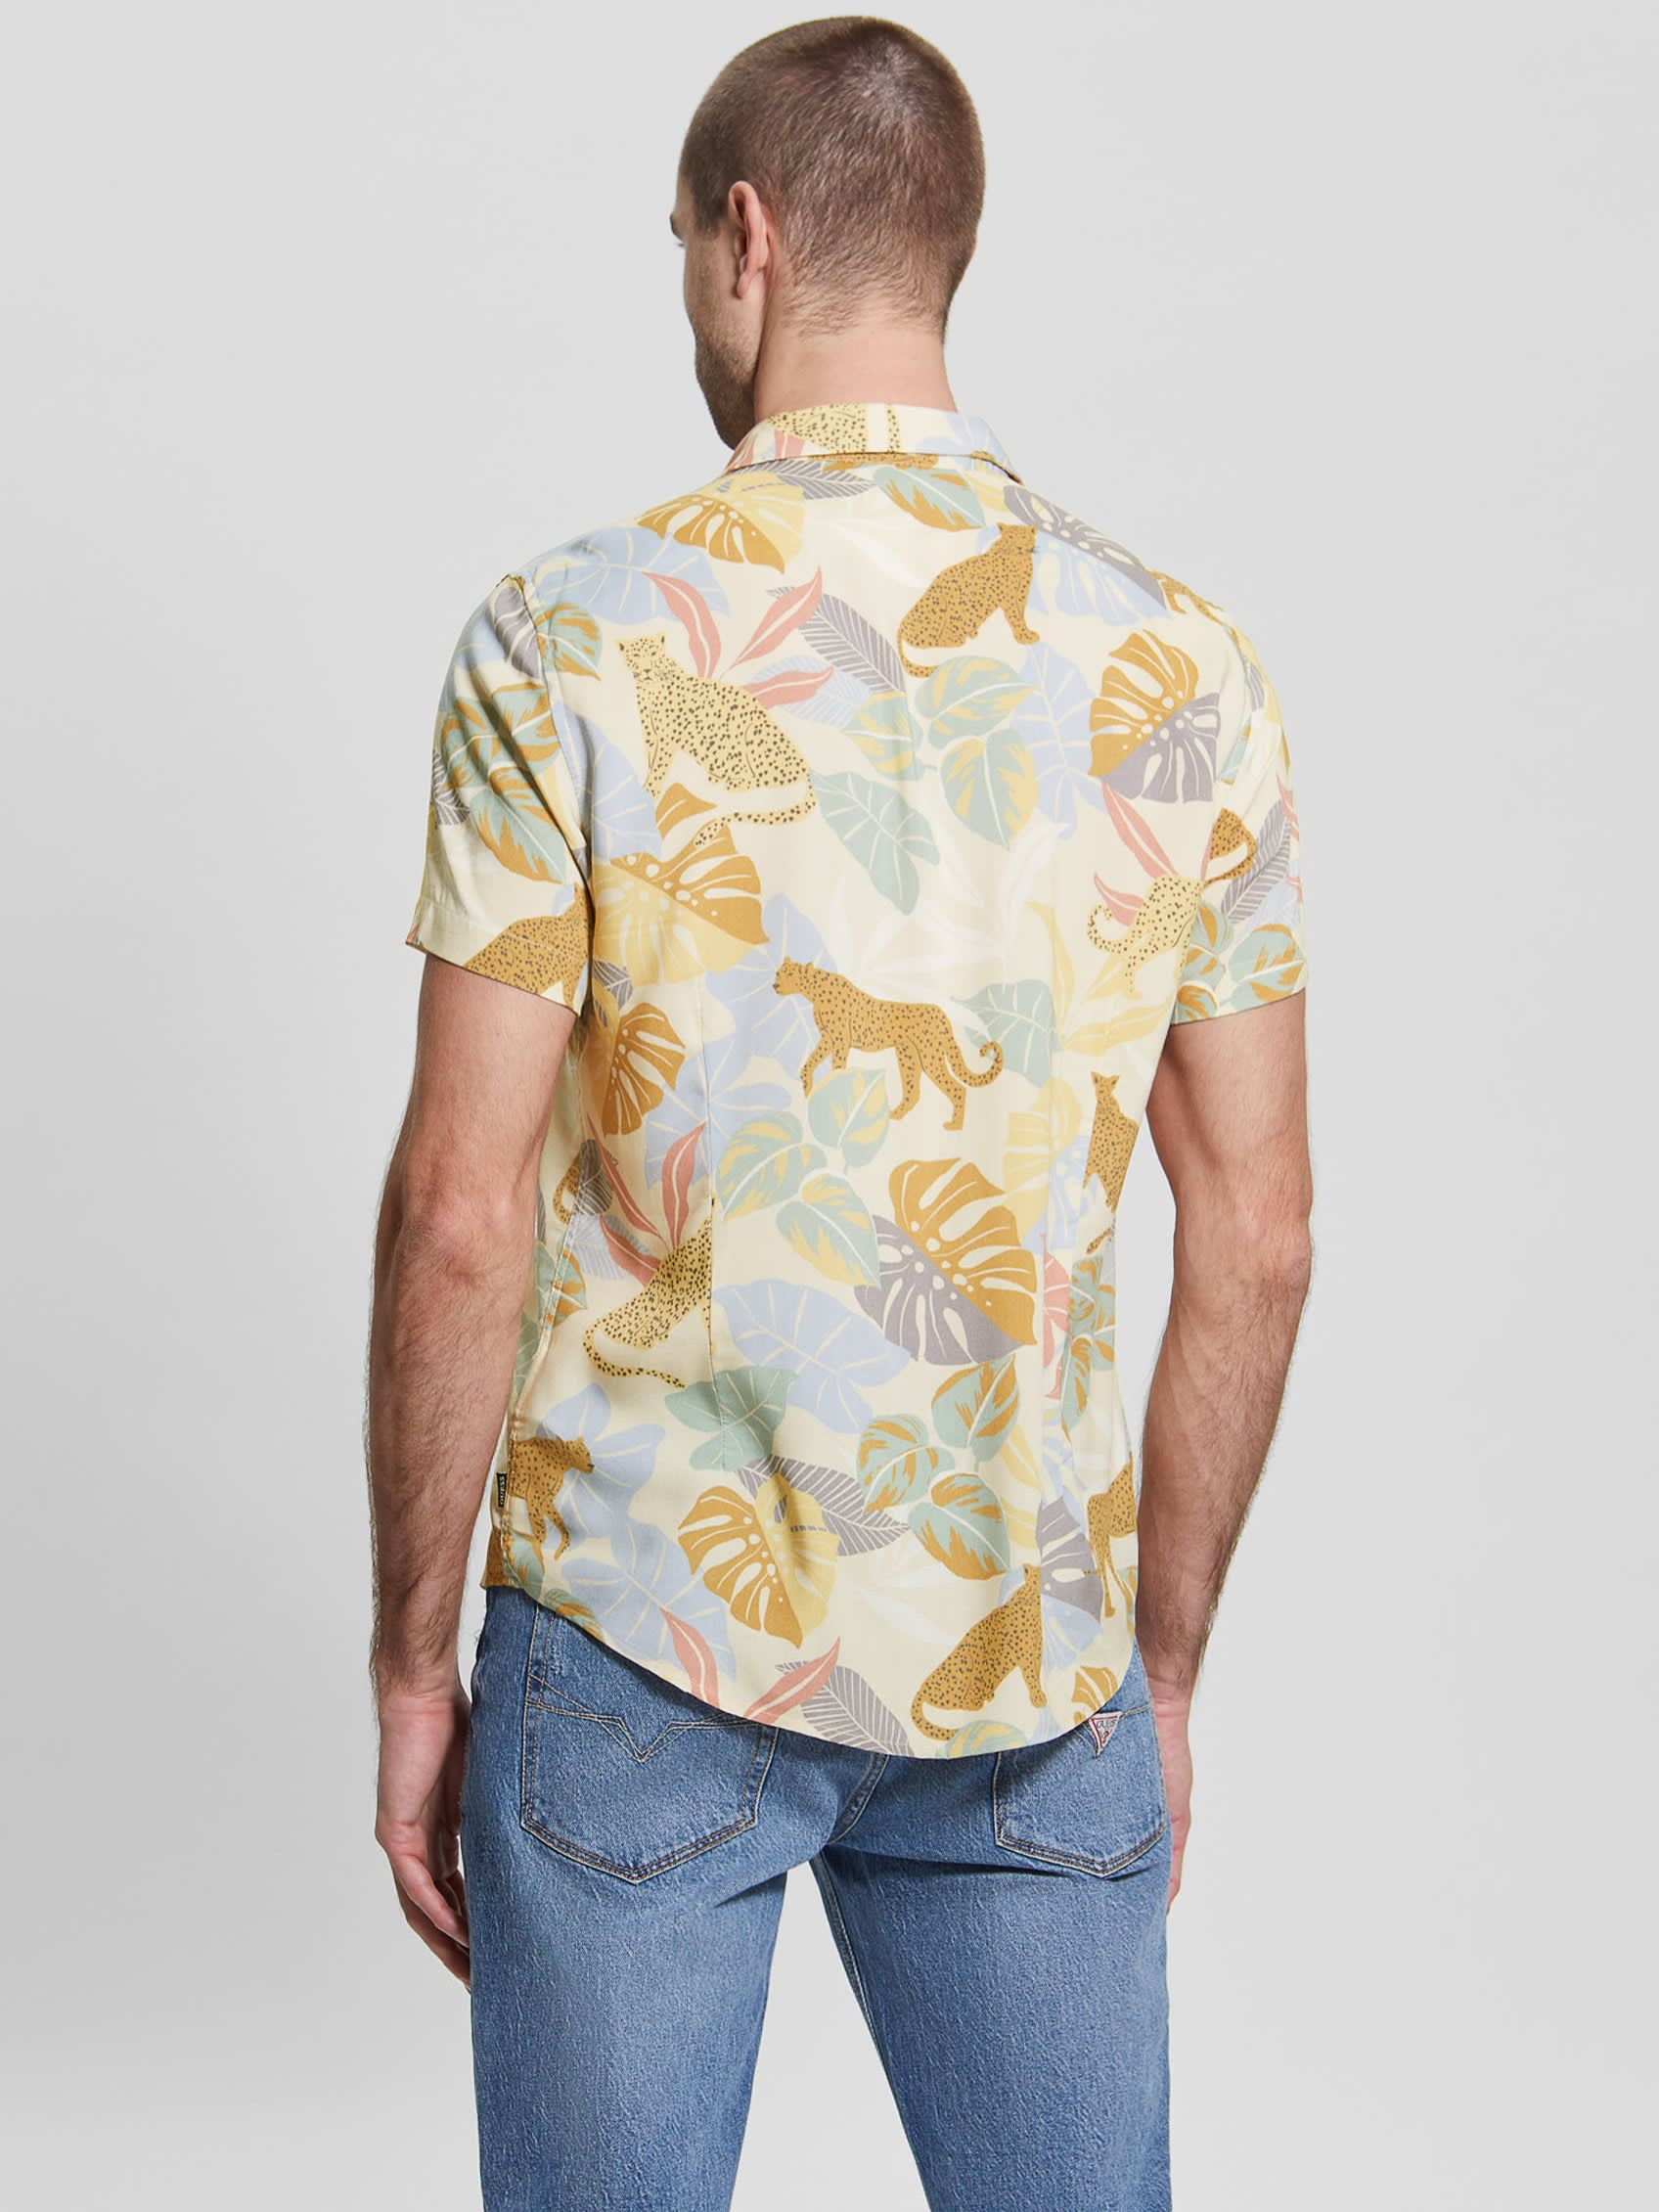 ECO RAYON LEOPARD JUNGLE SHIRT | Guess Philippines